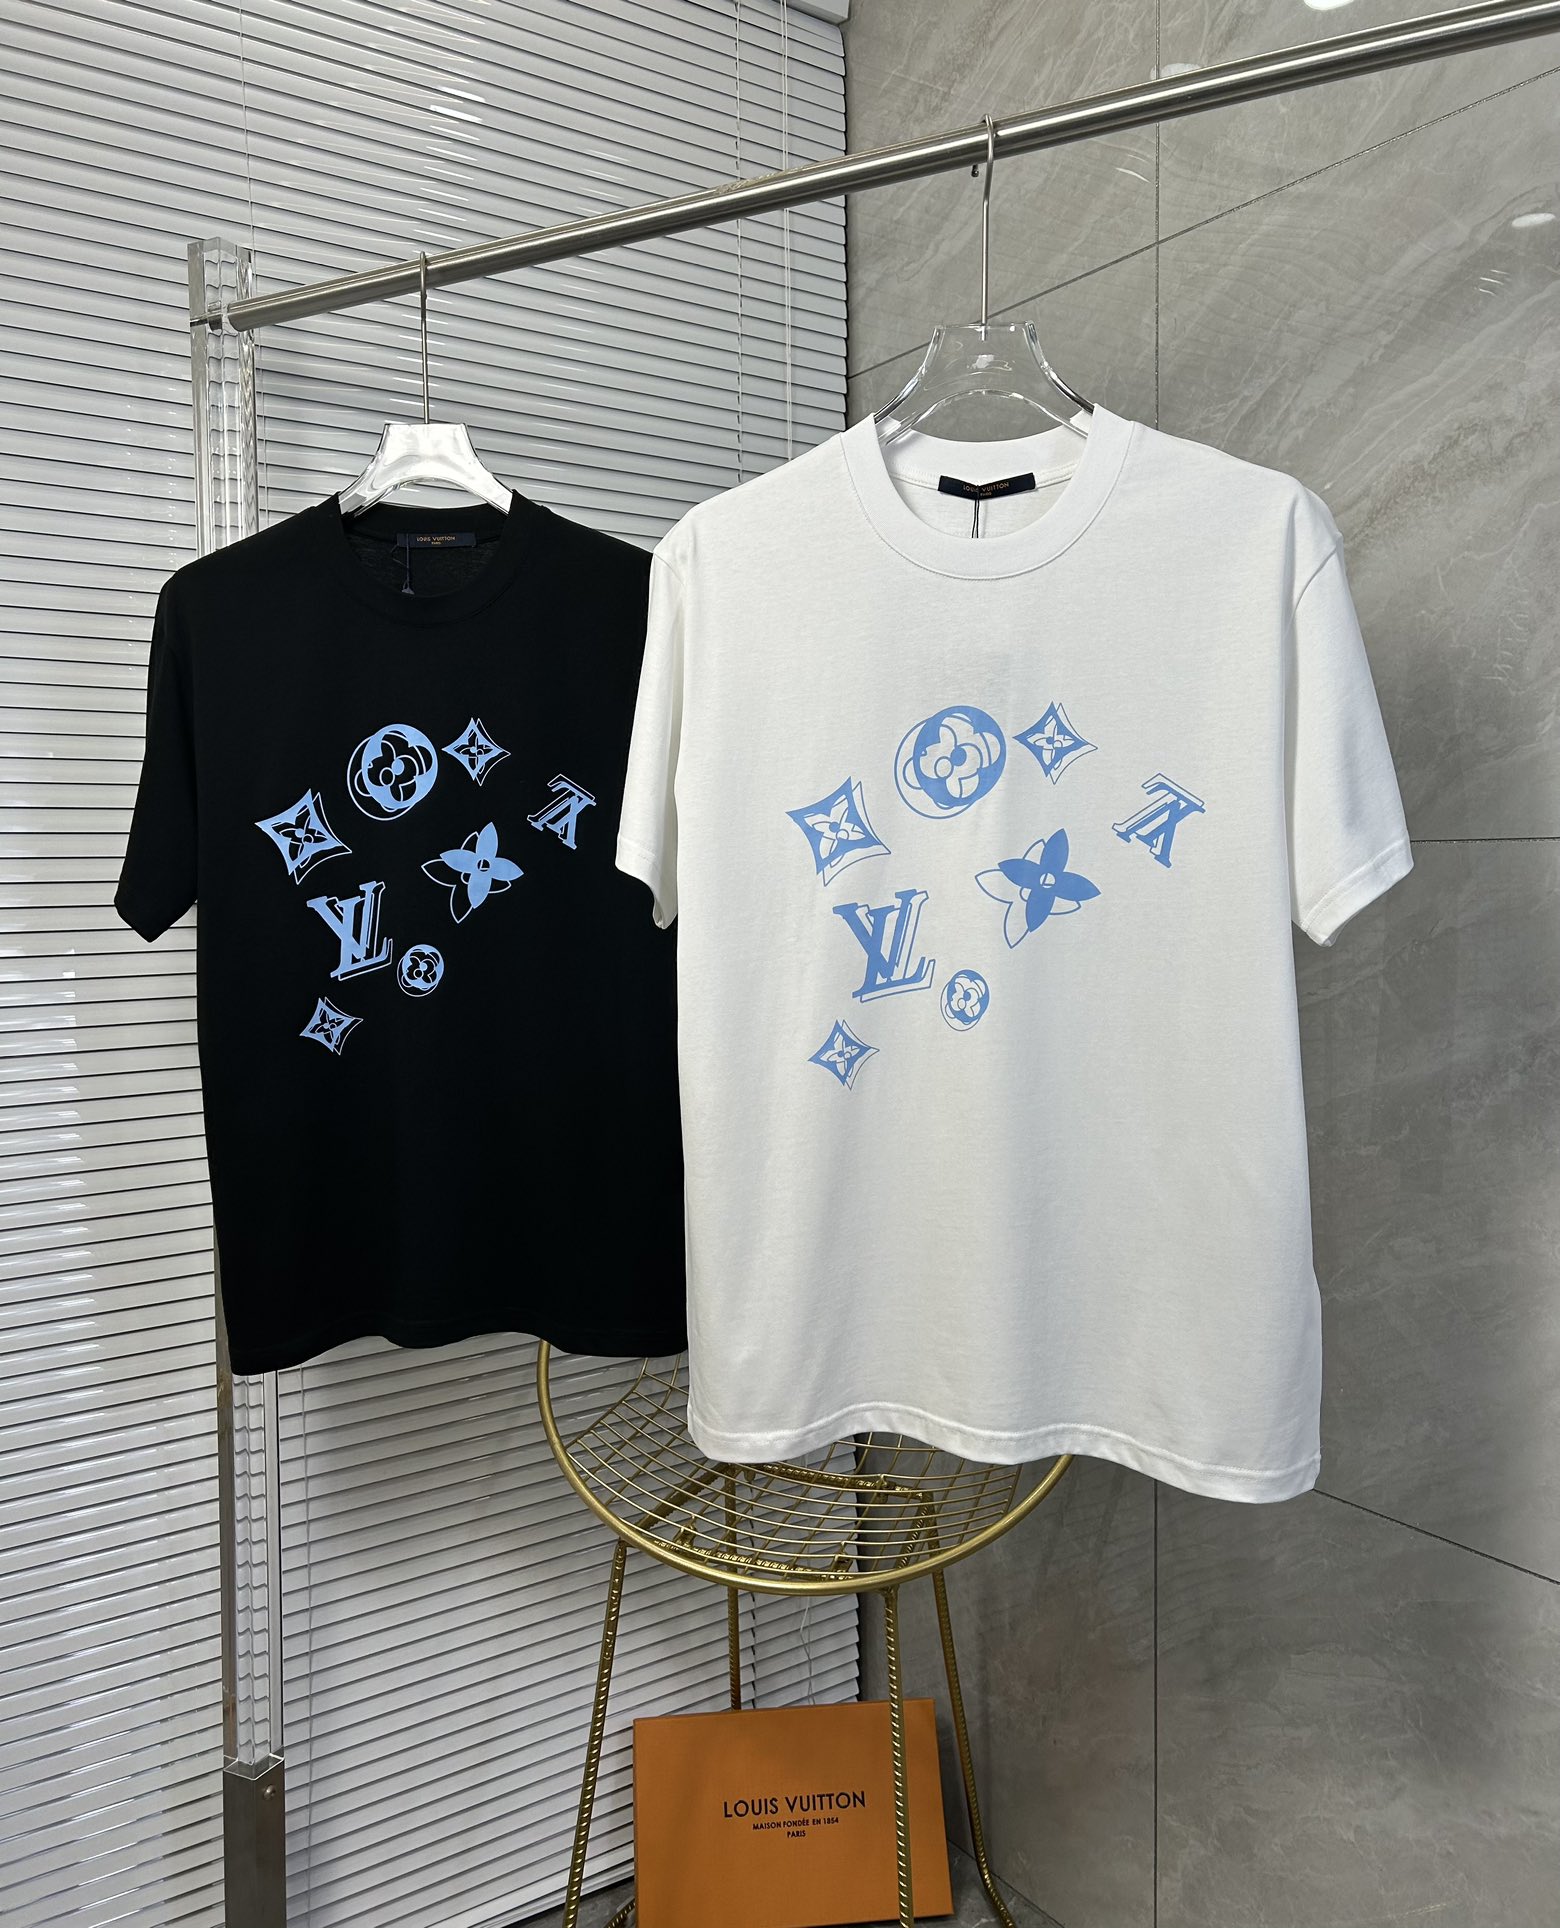 Louis Vuitton Replica
 Clothing T-Shirt Black White Printing Unisex Spring/Summer Collection Fashion Short Sleeve